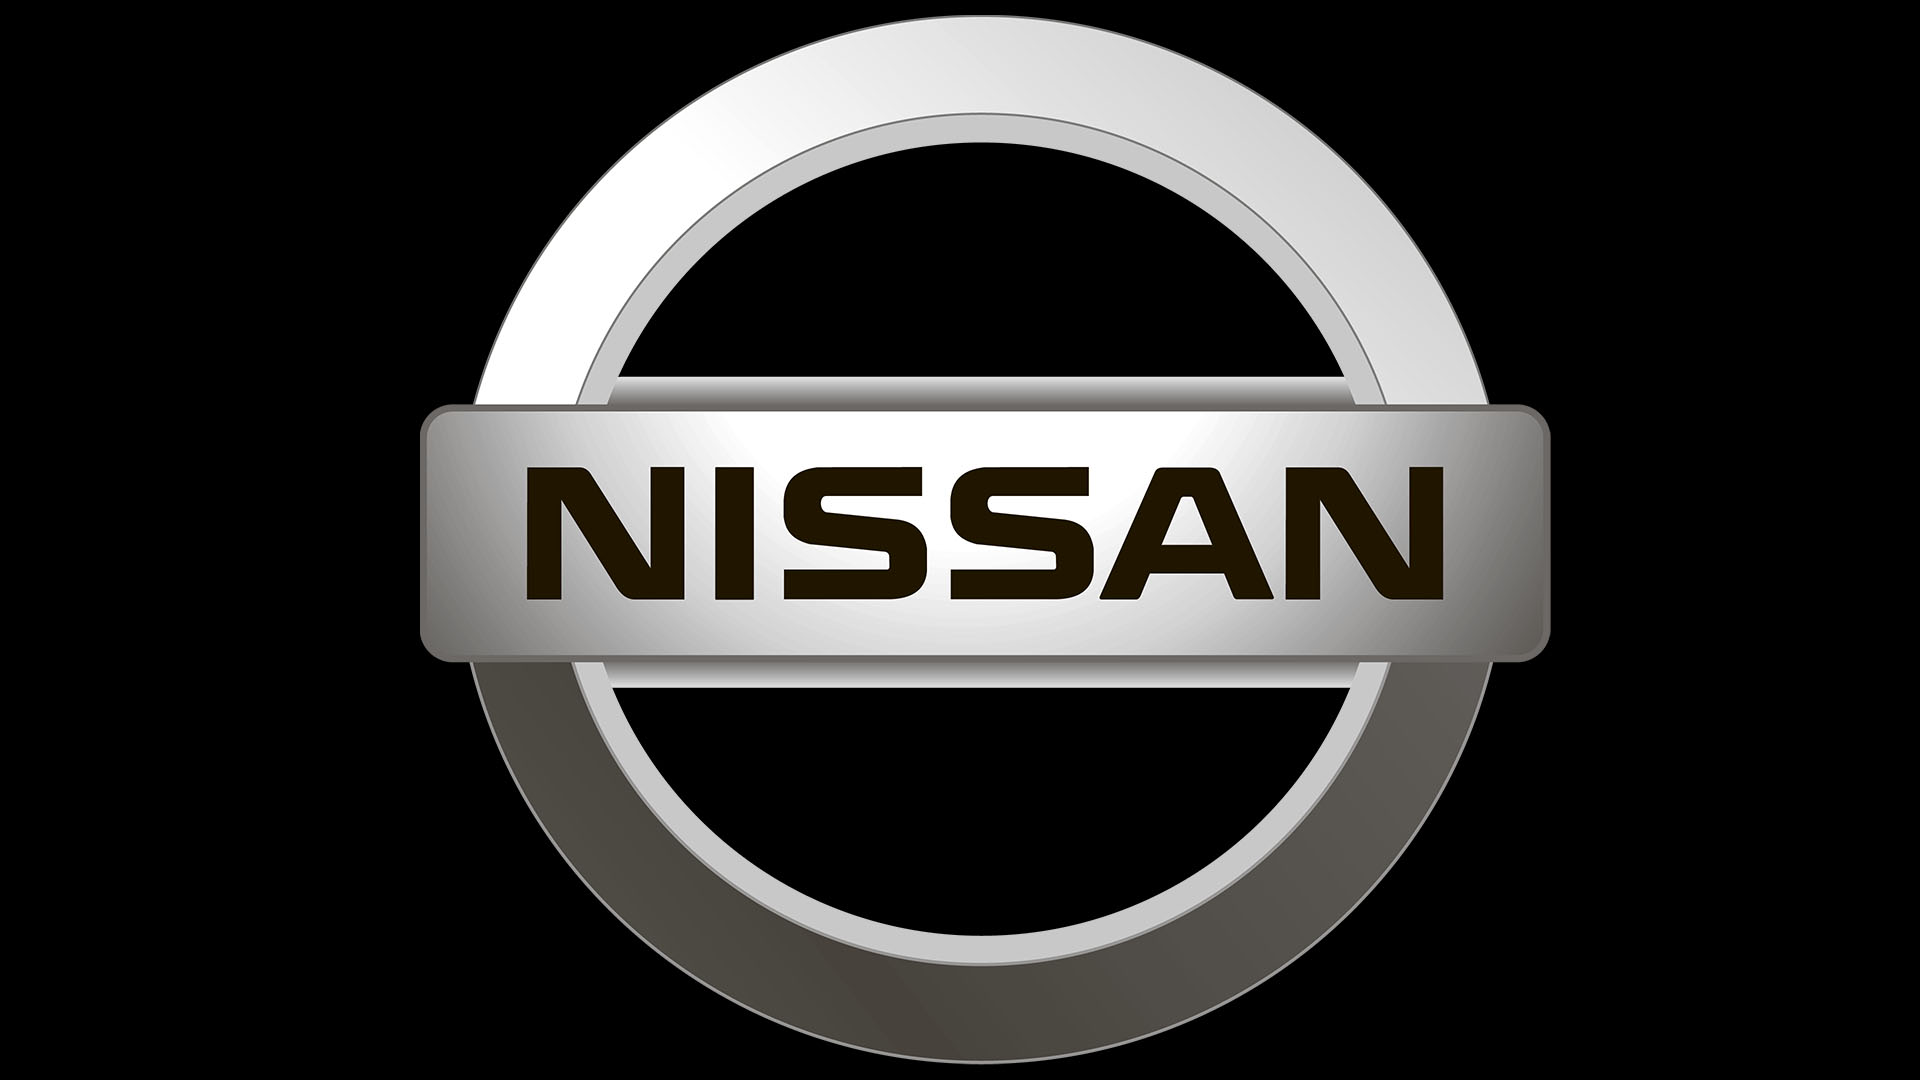 Nissan Logo Meaning and History [Nissan symbol]